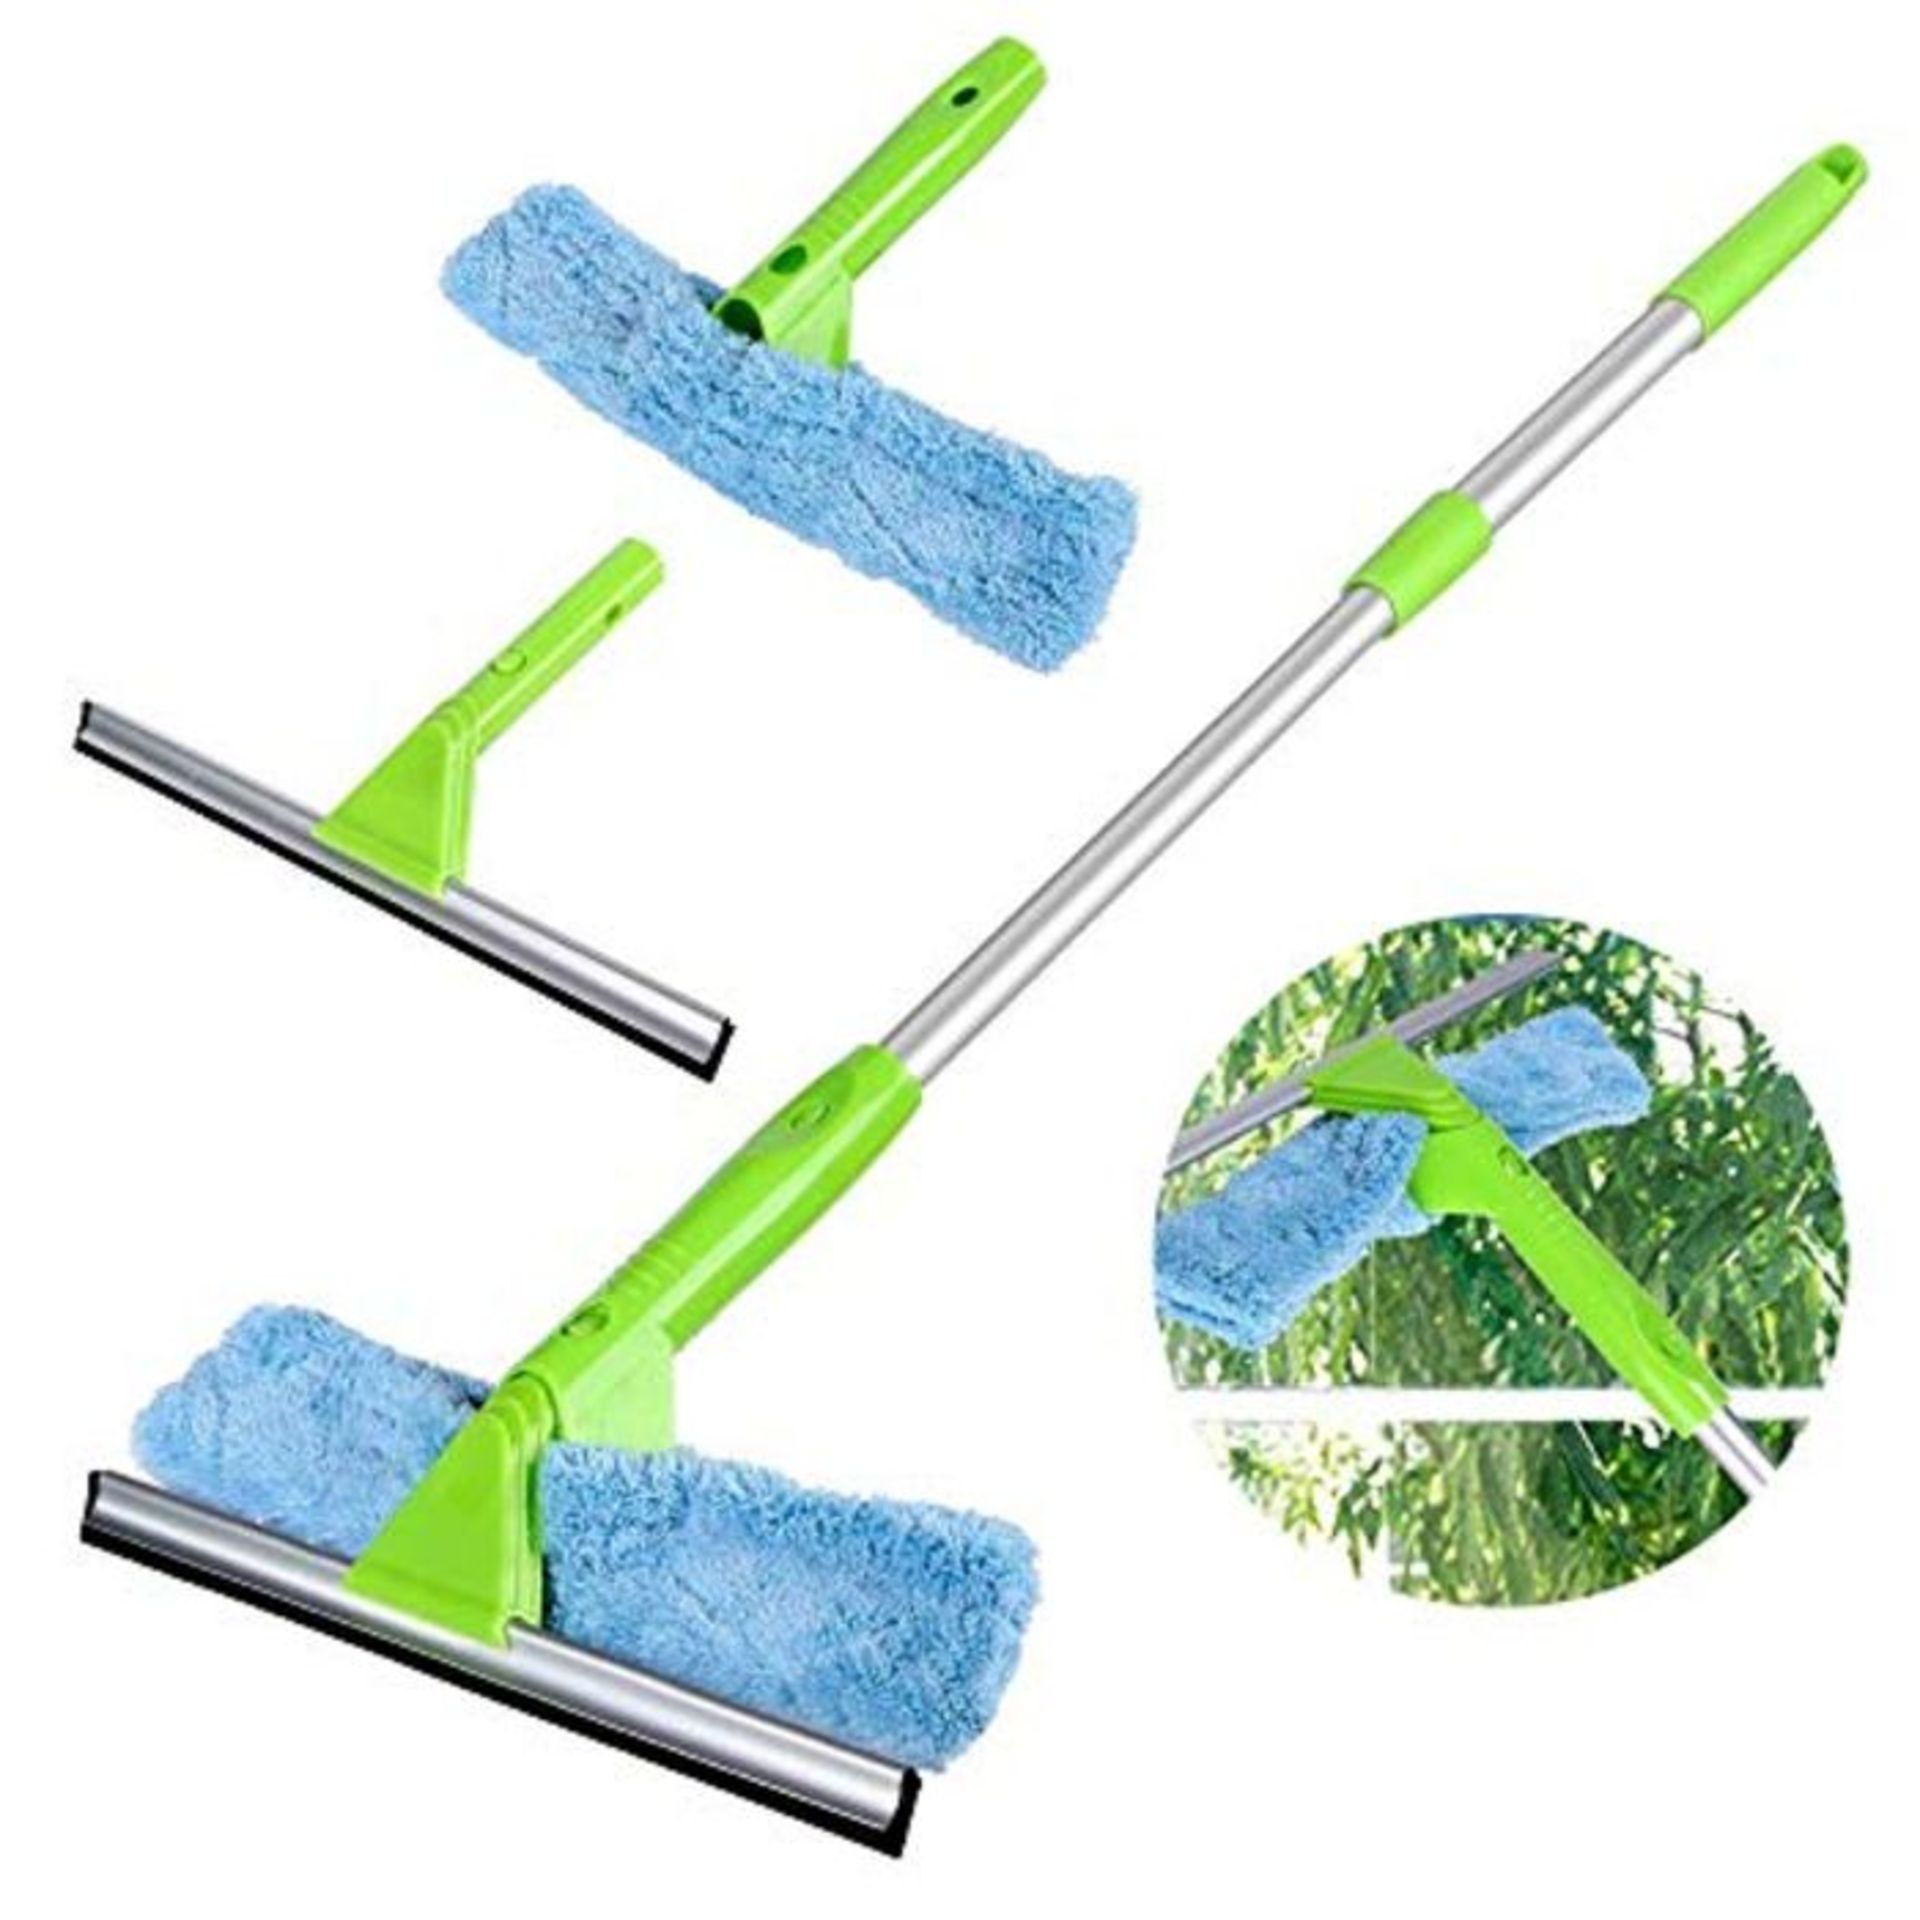 Window Squeegee Cleaner, 2 in 1 Squeegee with Extension Pole 90cm Telescopic Window Gl